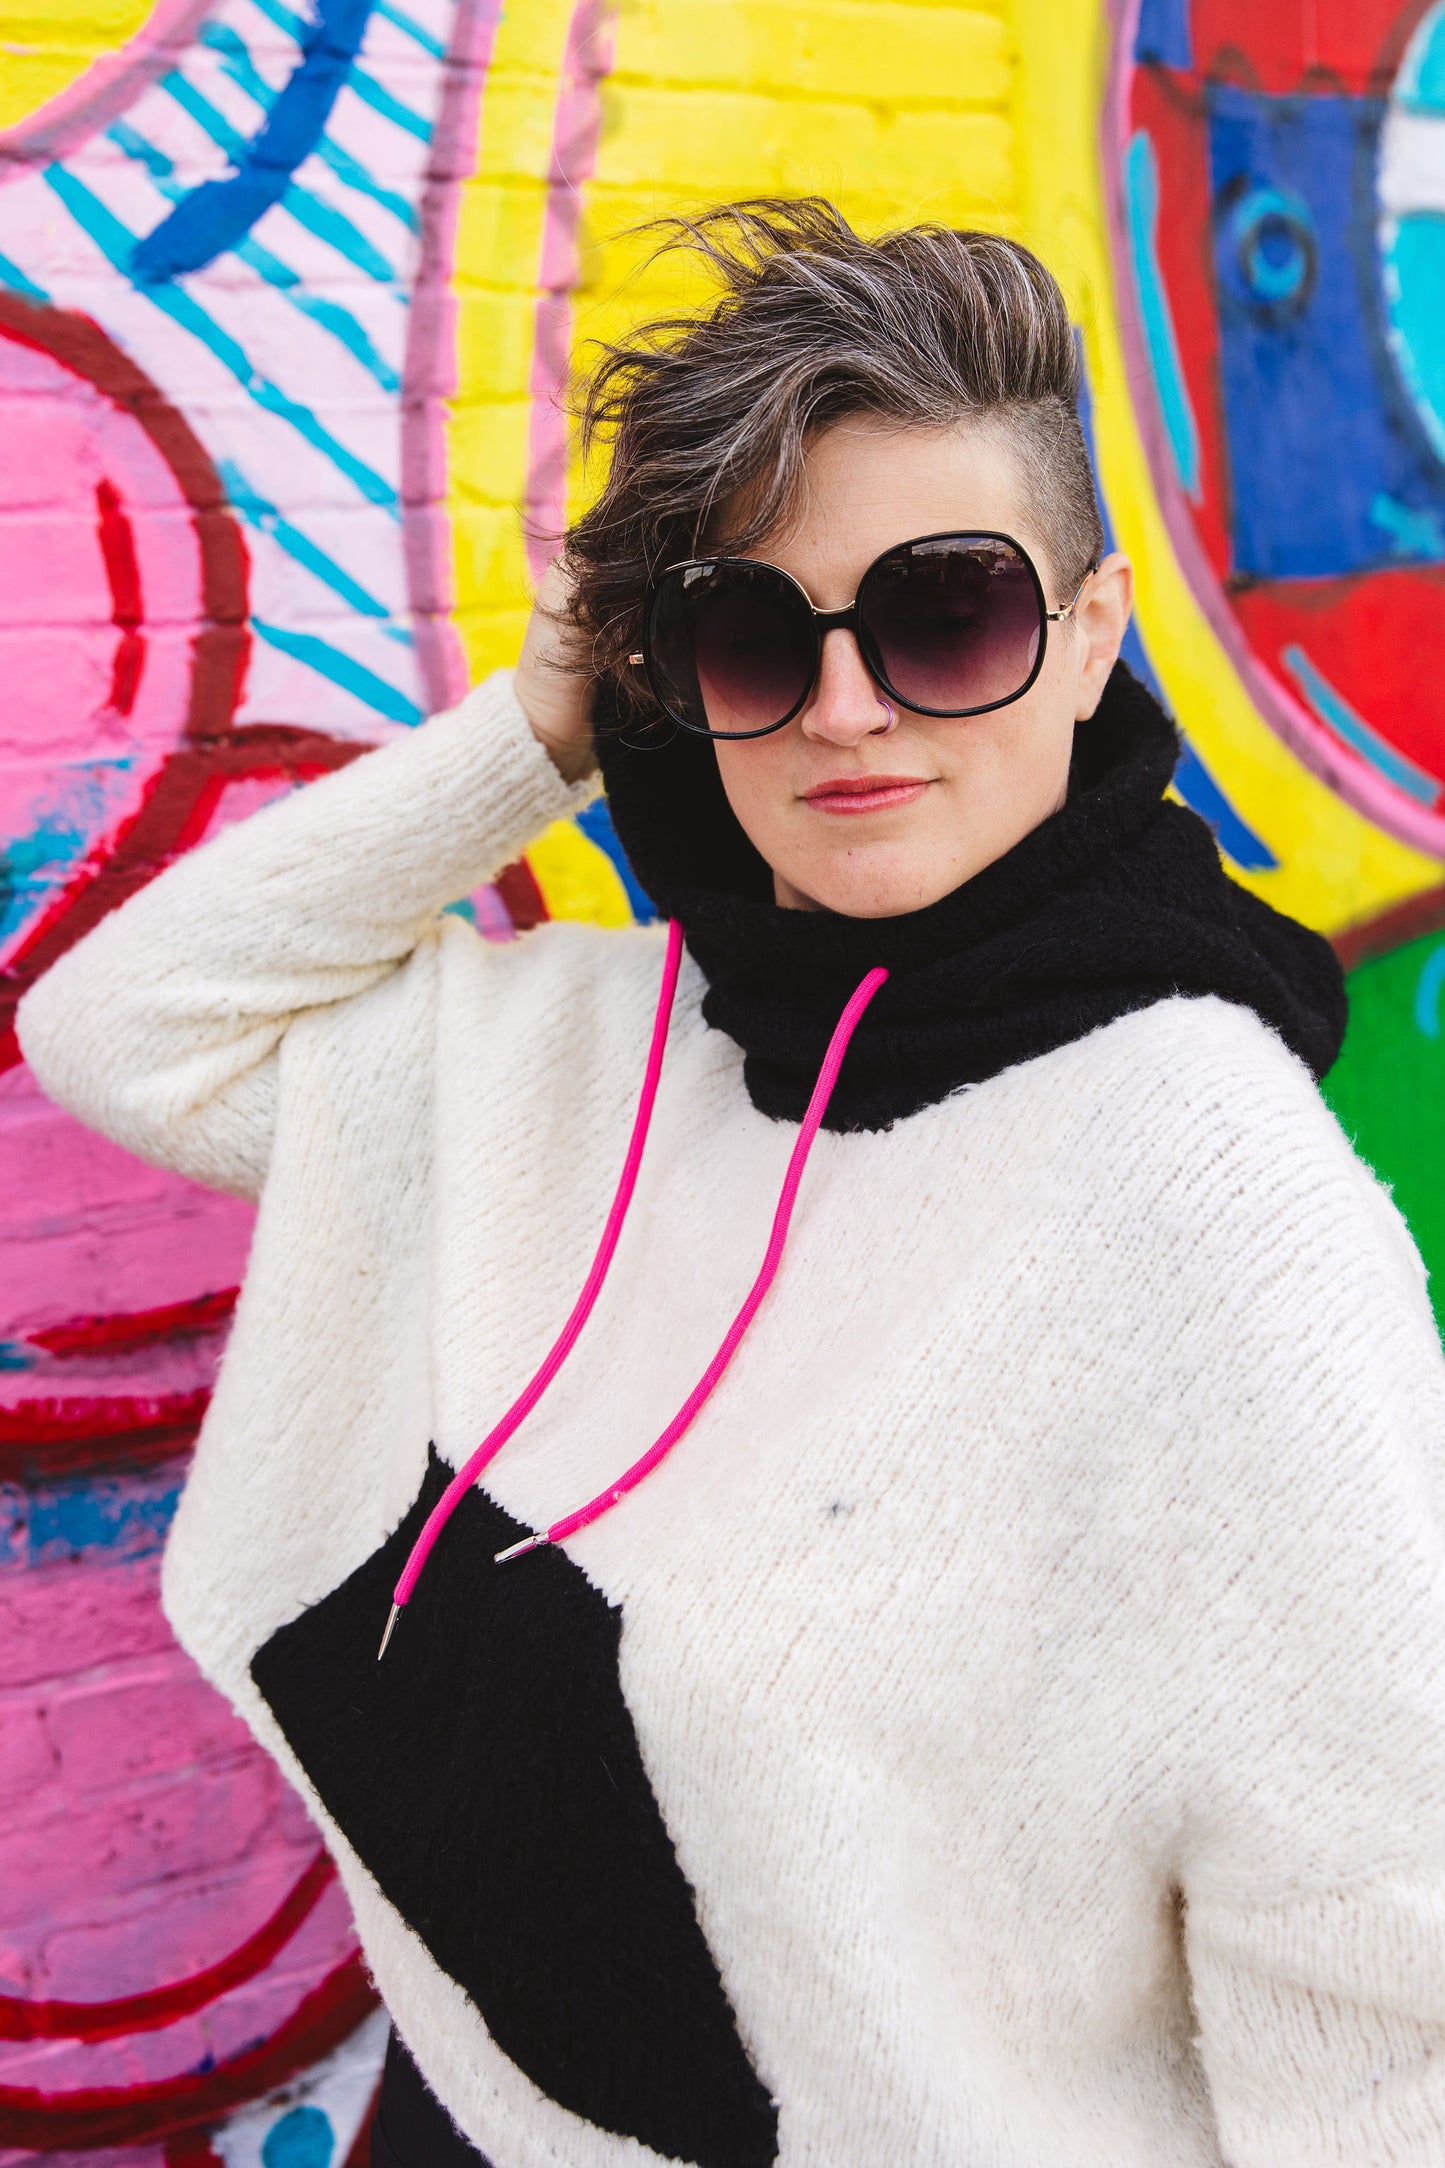 Jen wears Keeper, a super soft handknit hoodie with a bright black and white graphic colorblock effect.